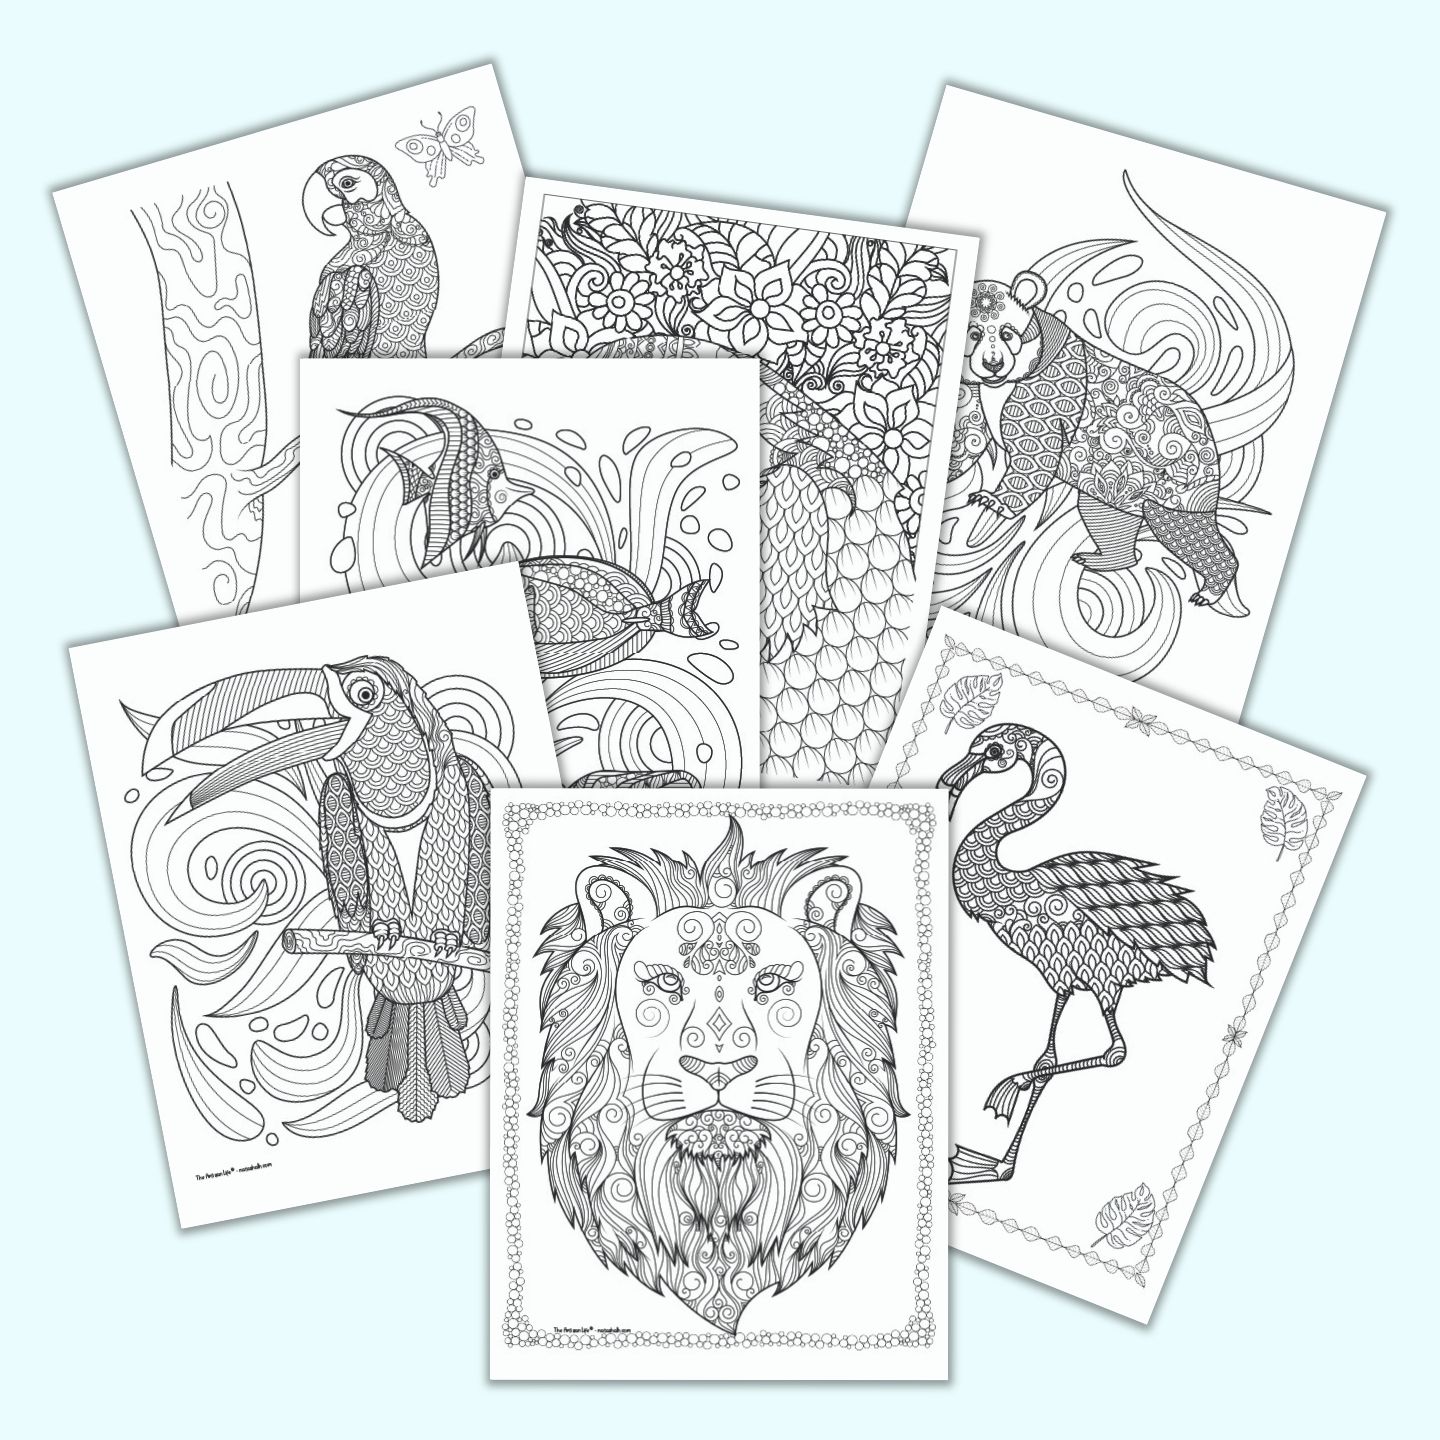 21 Free Animal Coloring Pages for Adults - The Artisan Life